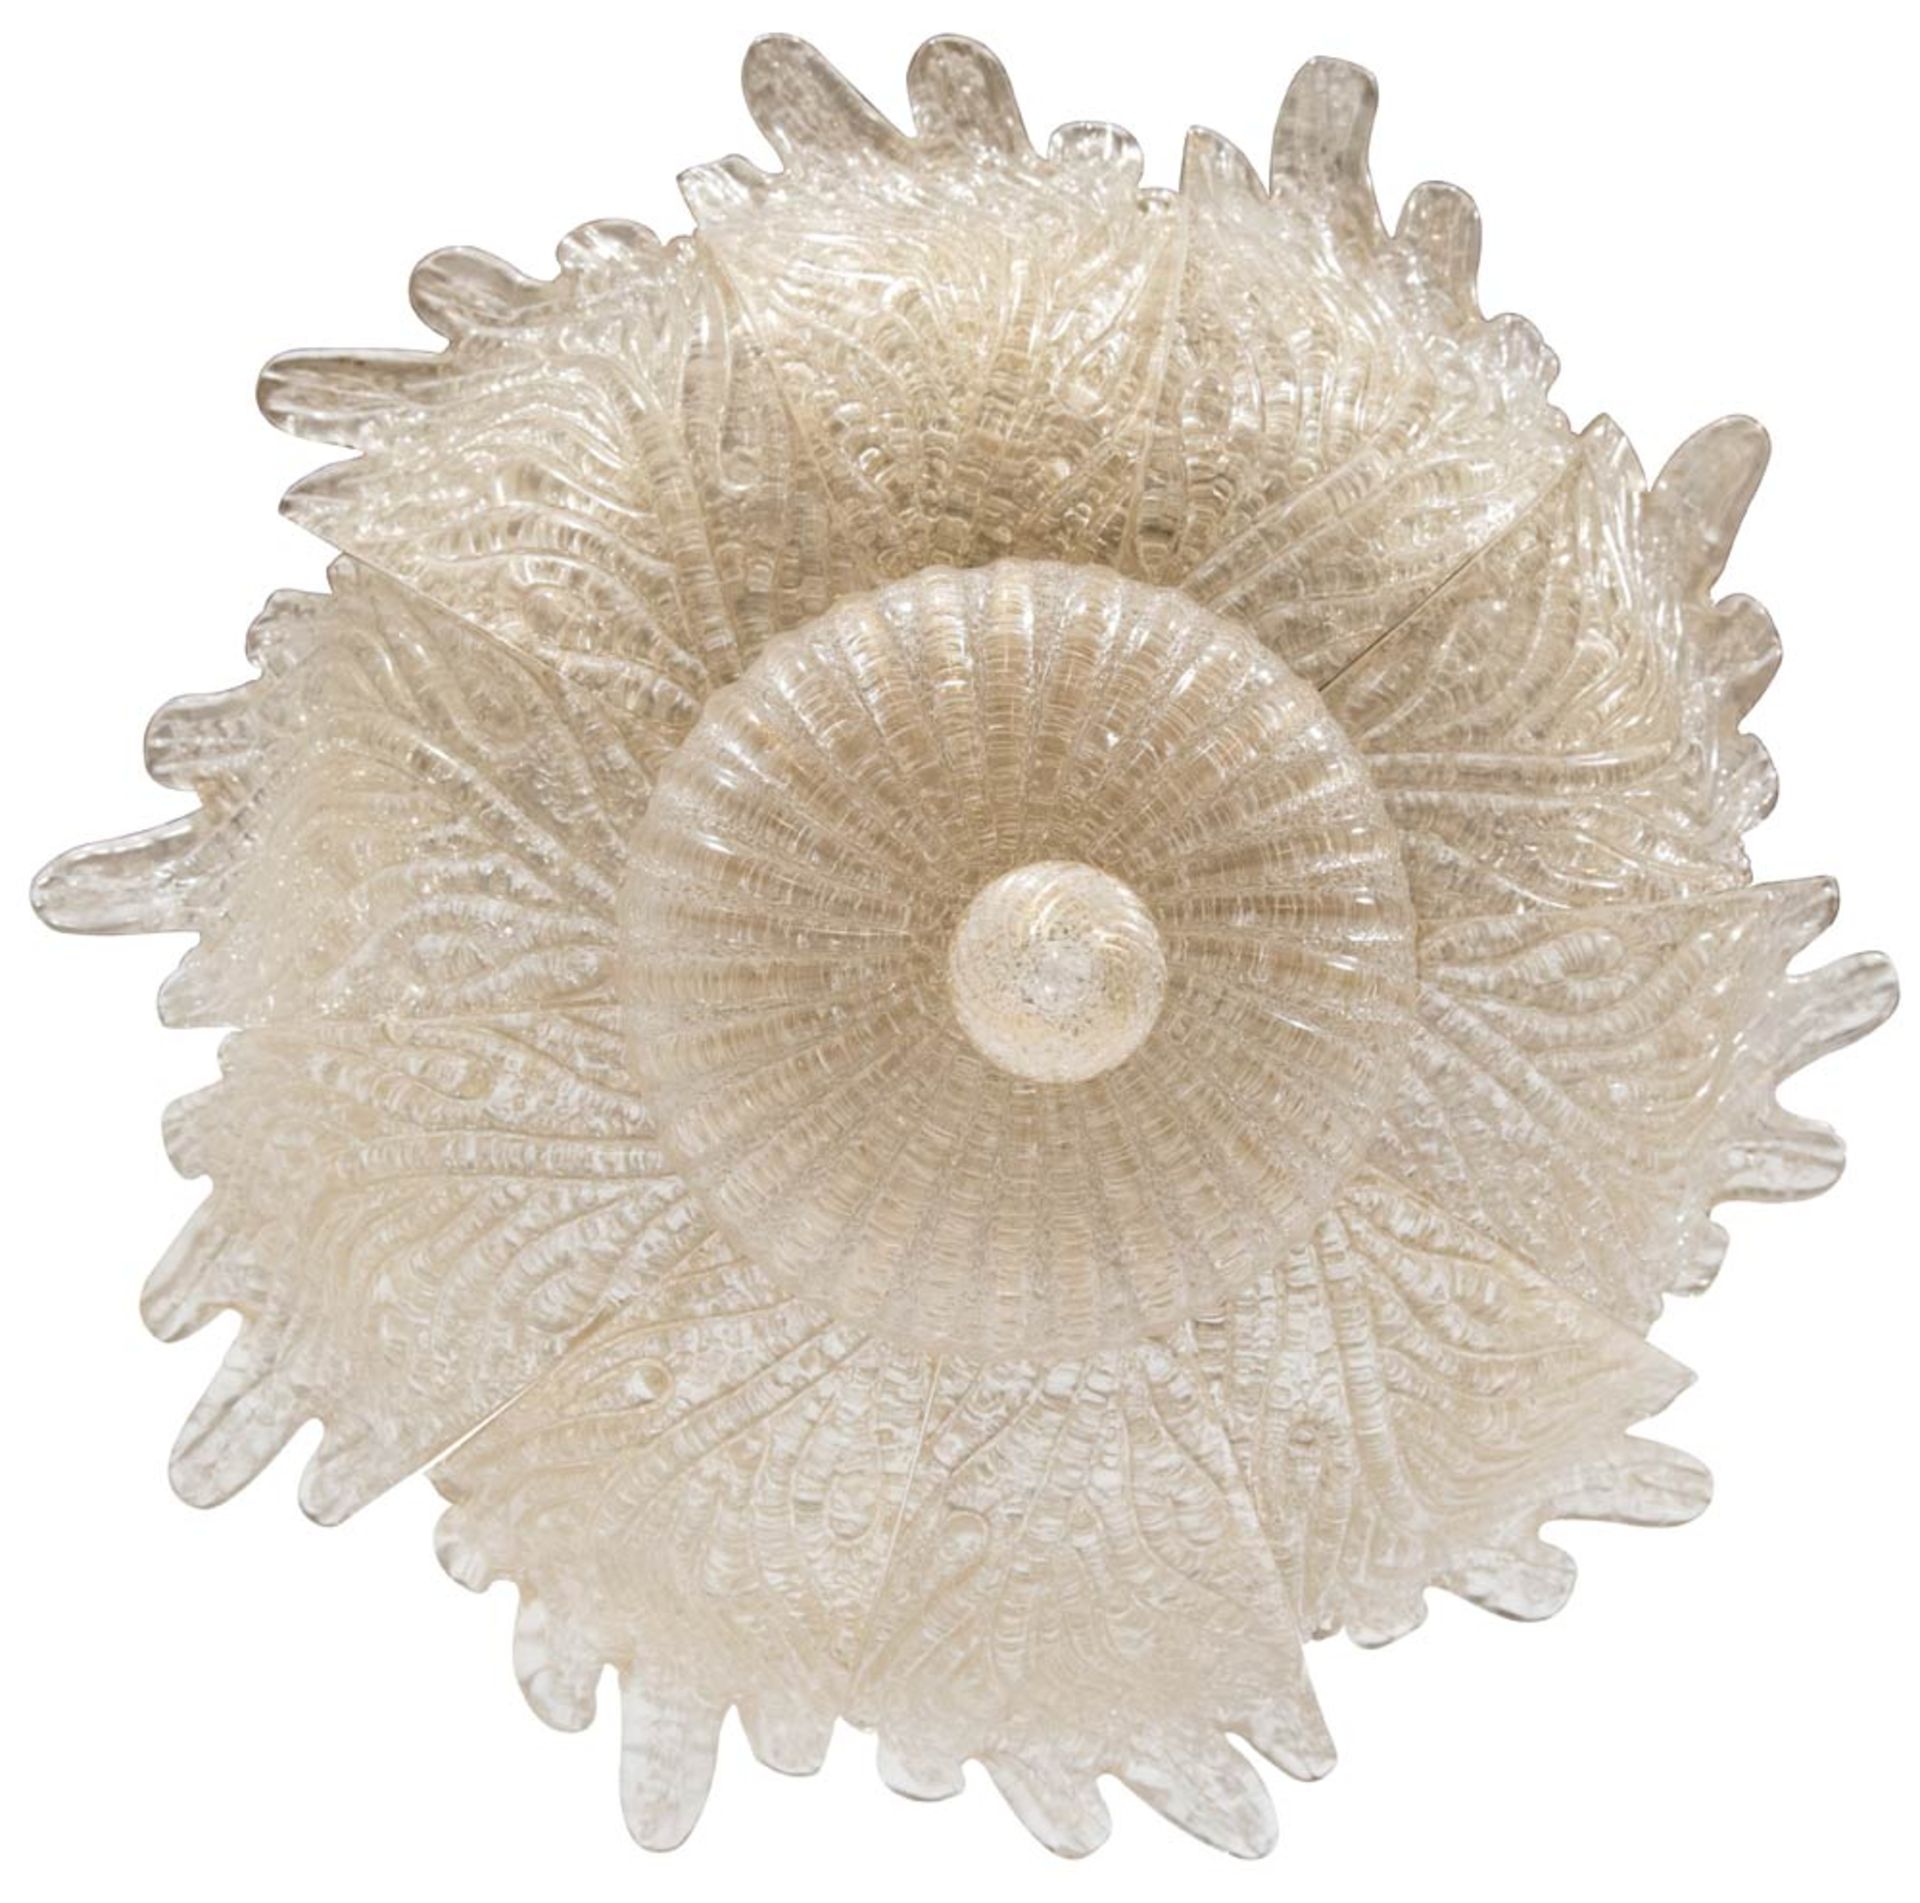 Barovier&Toso, Murano glass ceiling light, "Des Bains". - Image 2 of 2